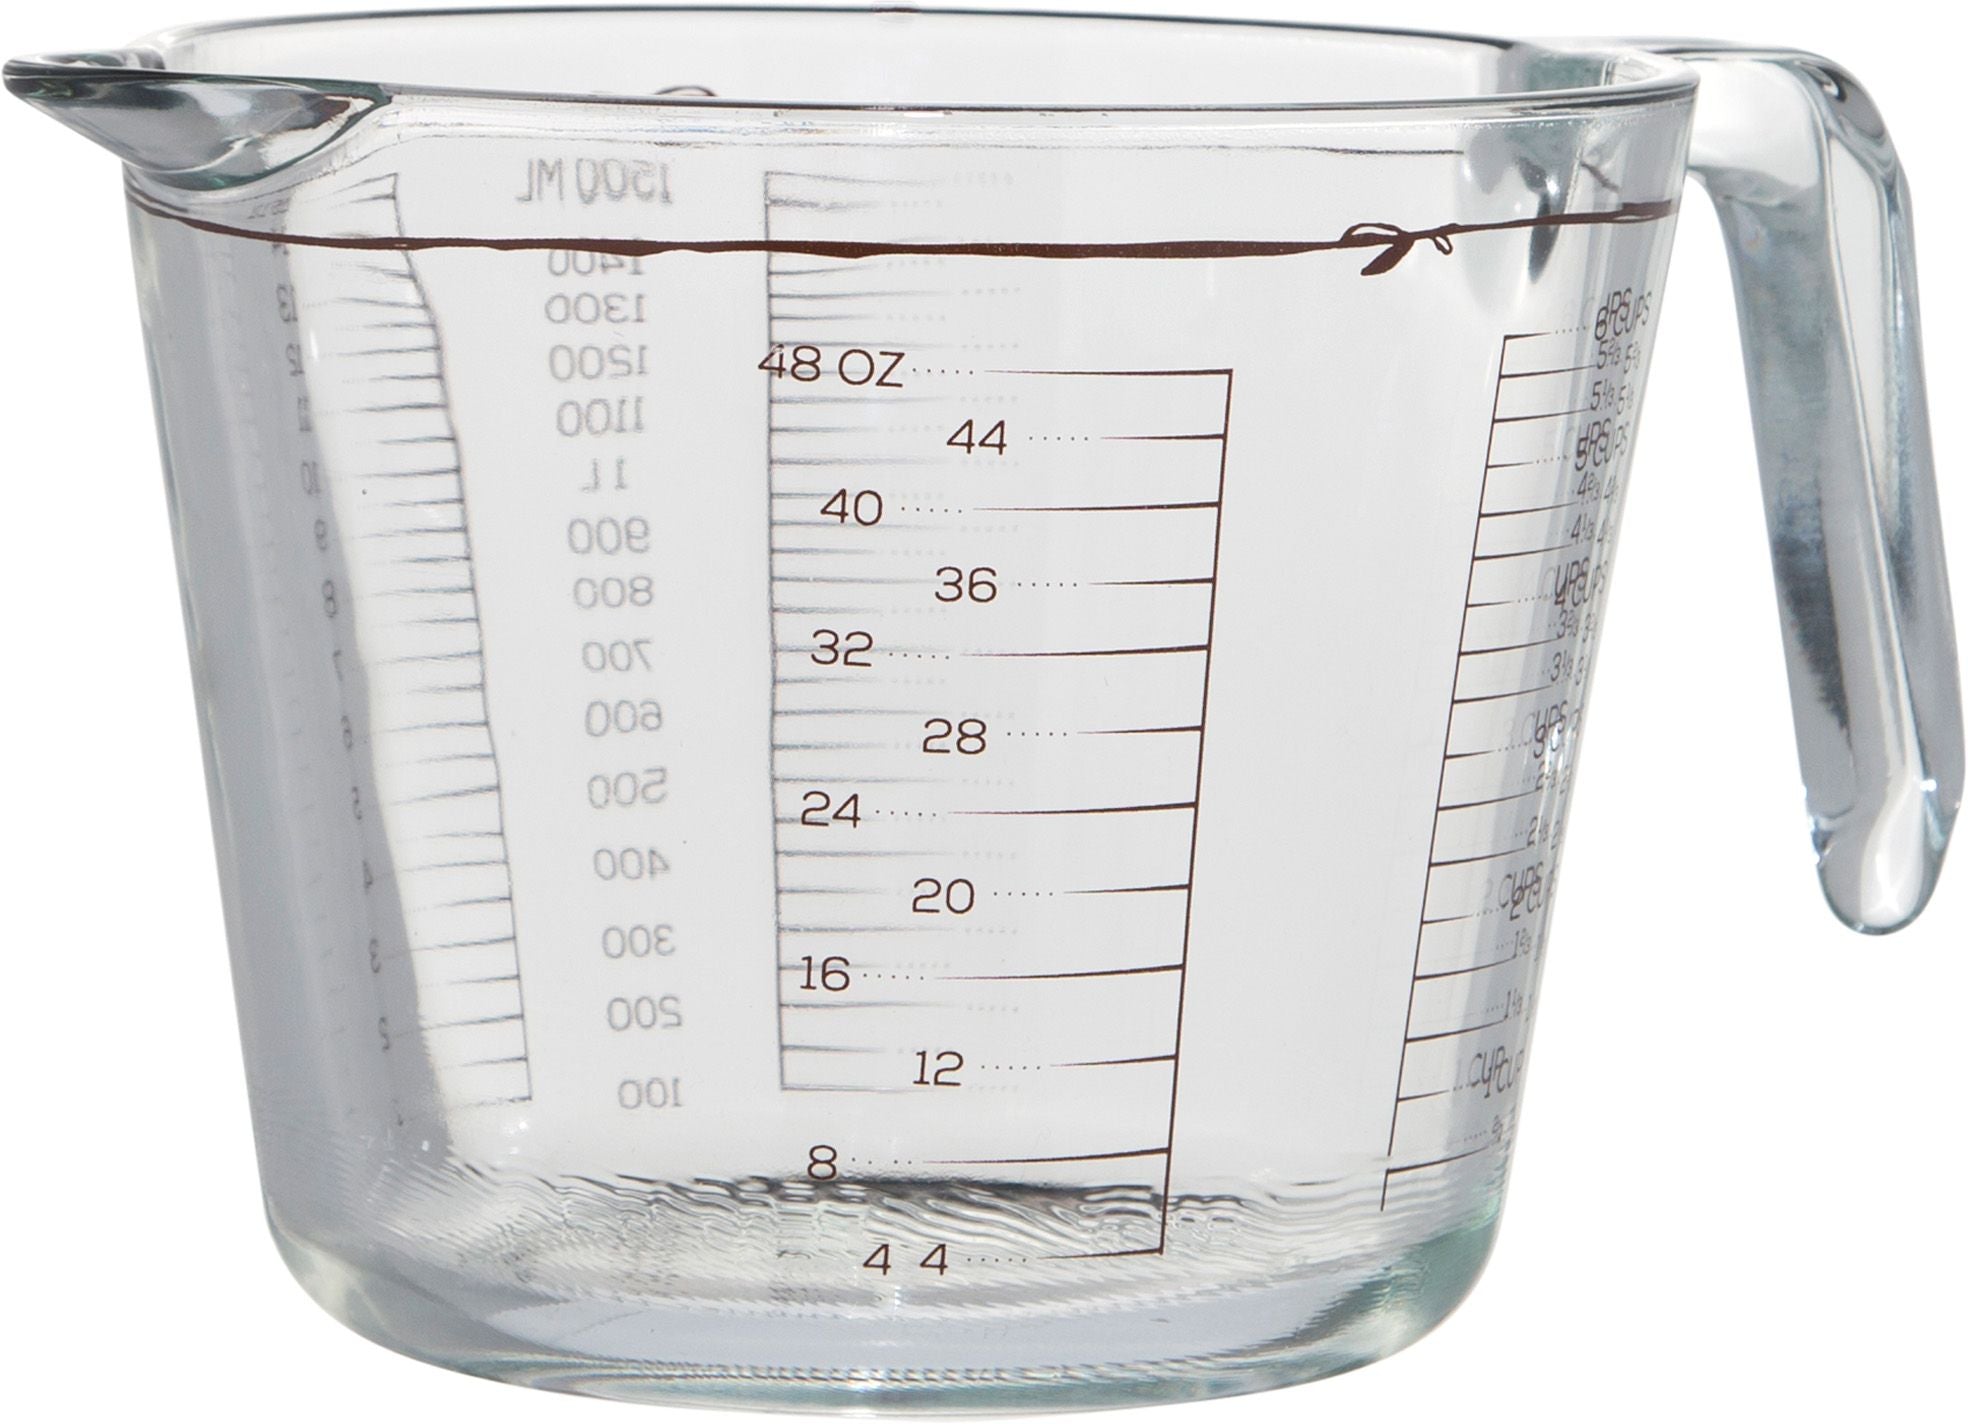 MAGNOLIA BAKERY 6 CUPS MEASURING CUP